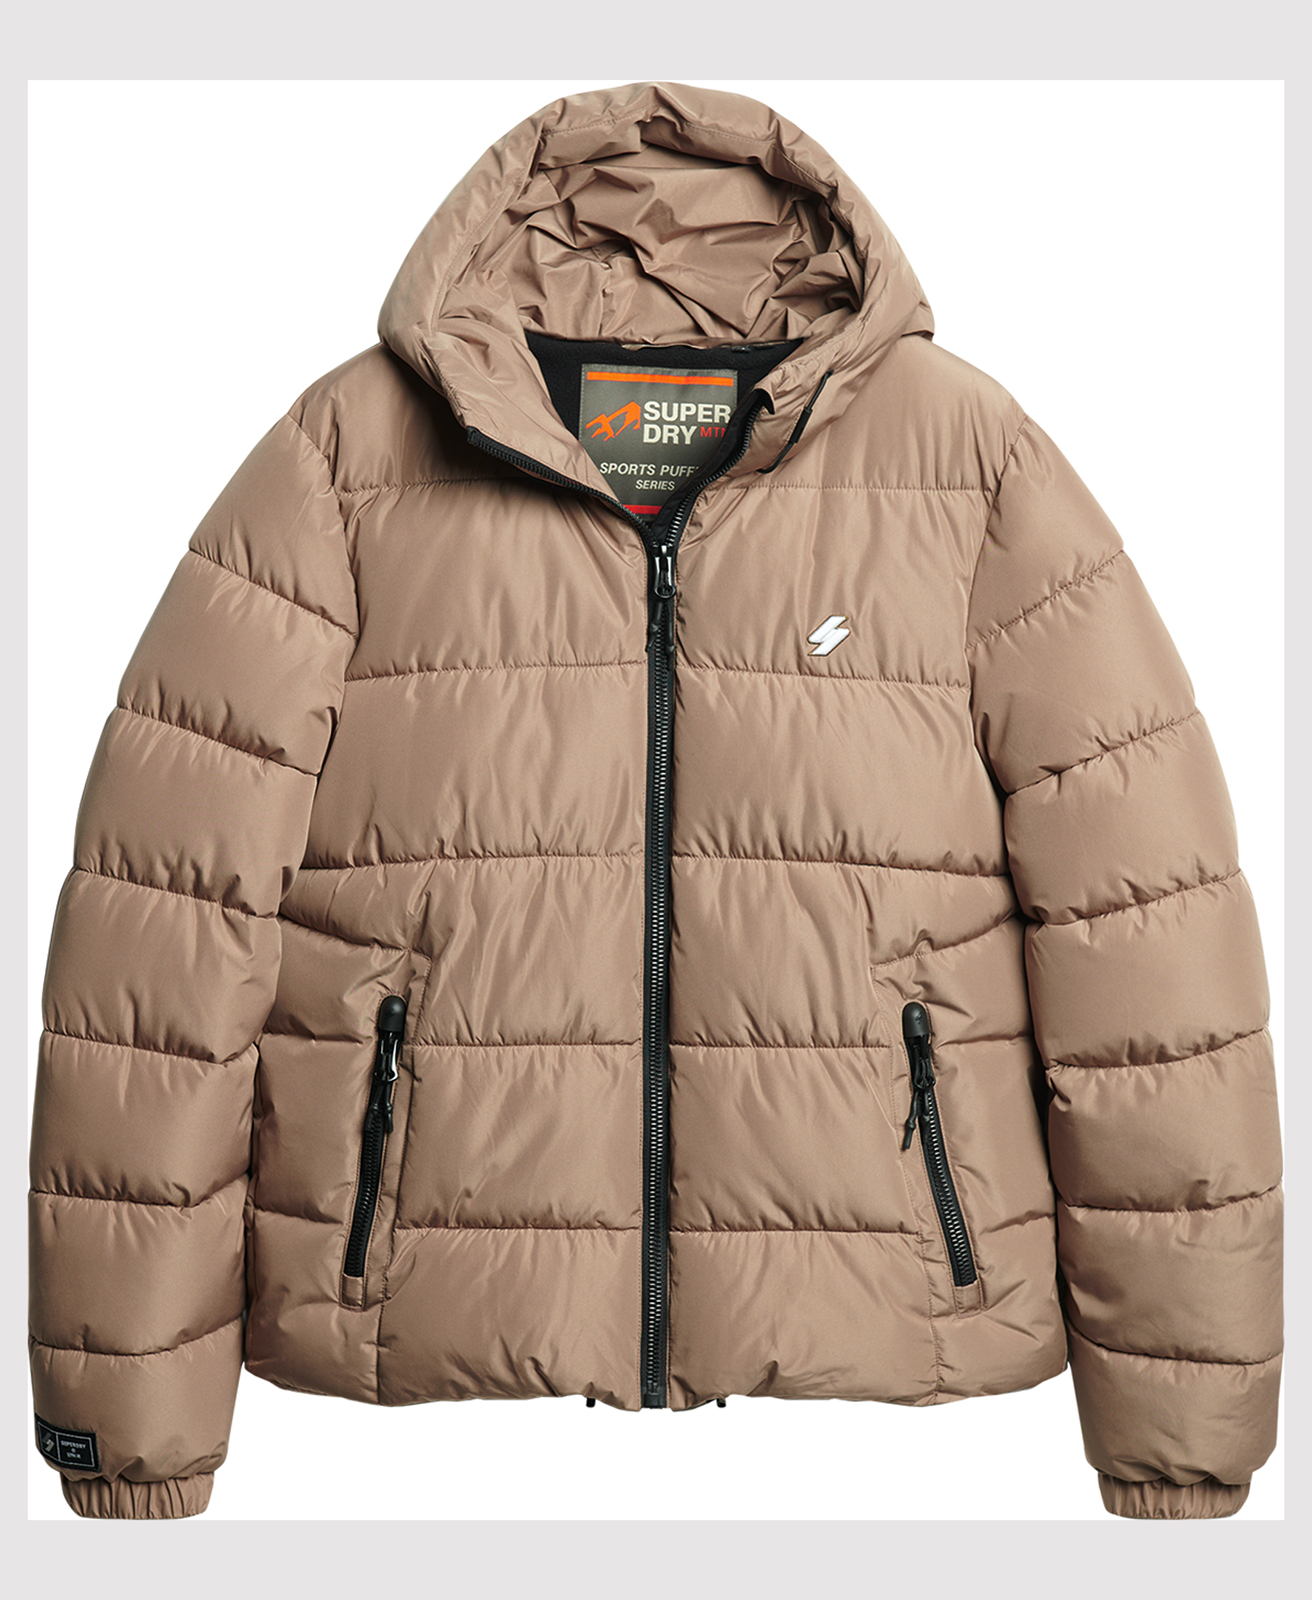 Superdry - HOODED SPORTS PUFFR JACKET - FOSSIL BROWN